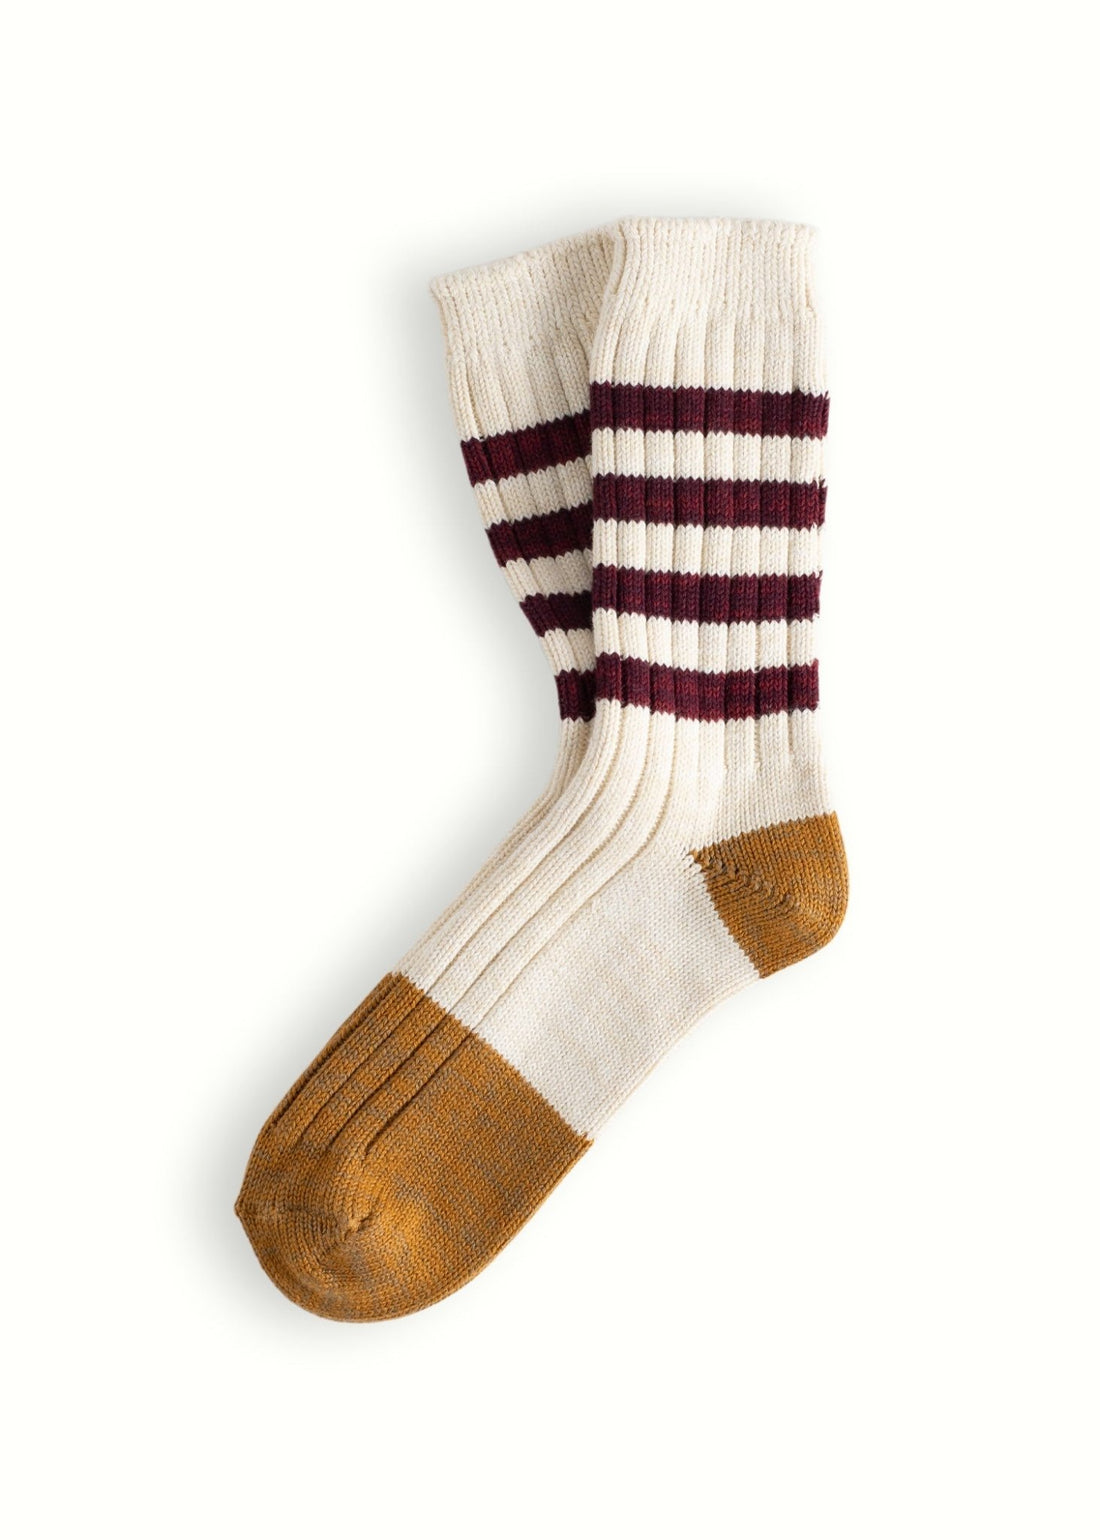 Thunders Love Socks - Marine Collection, Striped - The Flower Crate